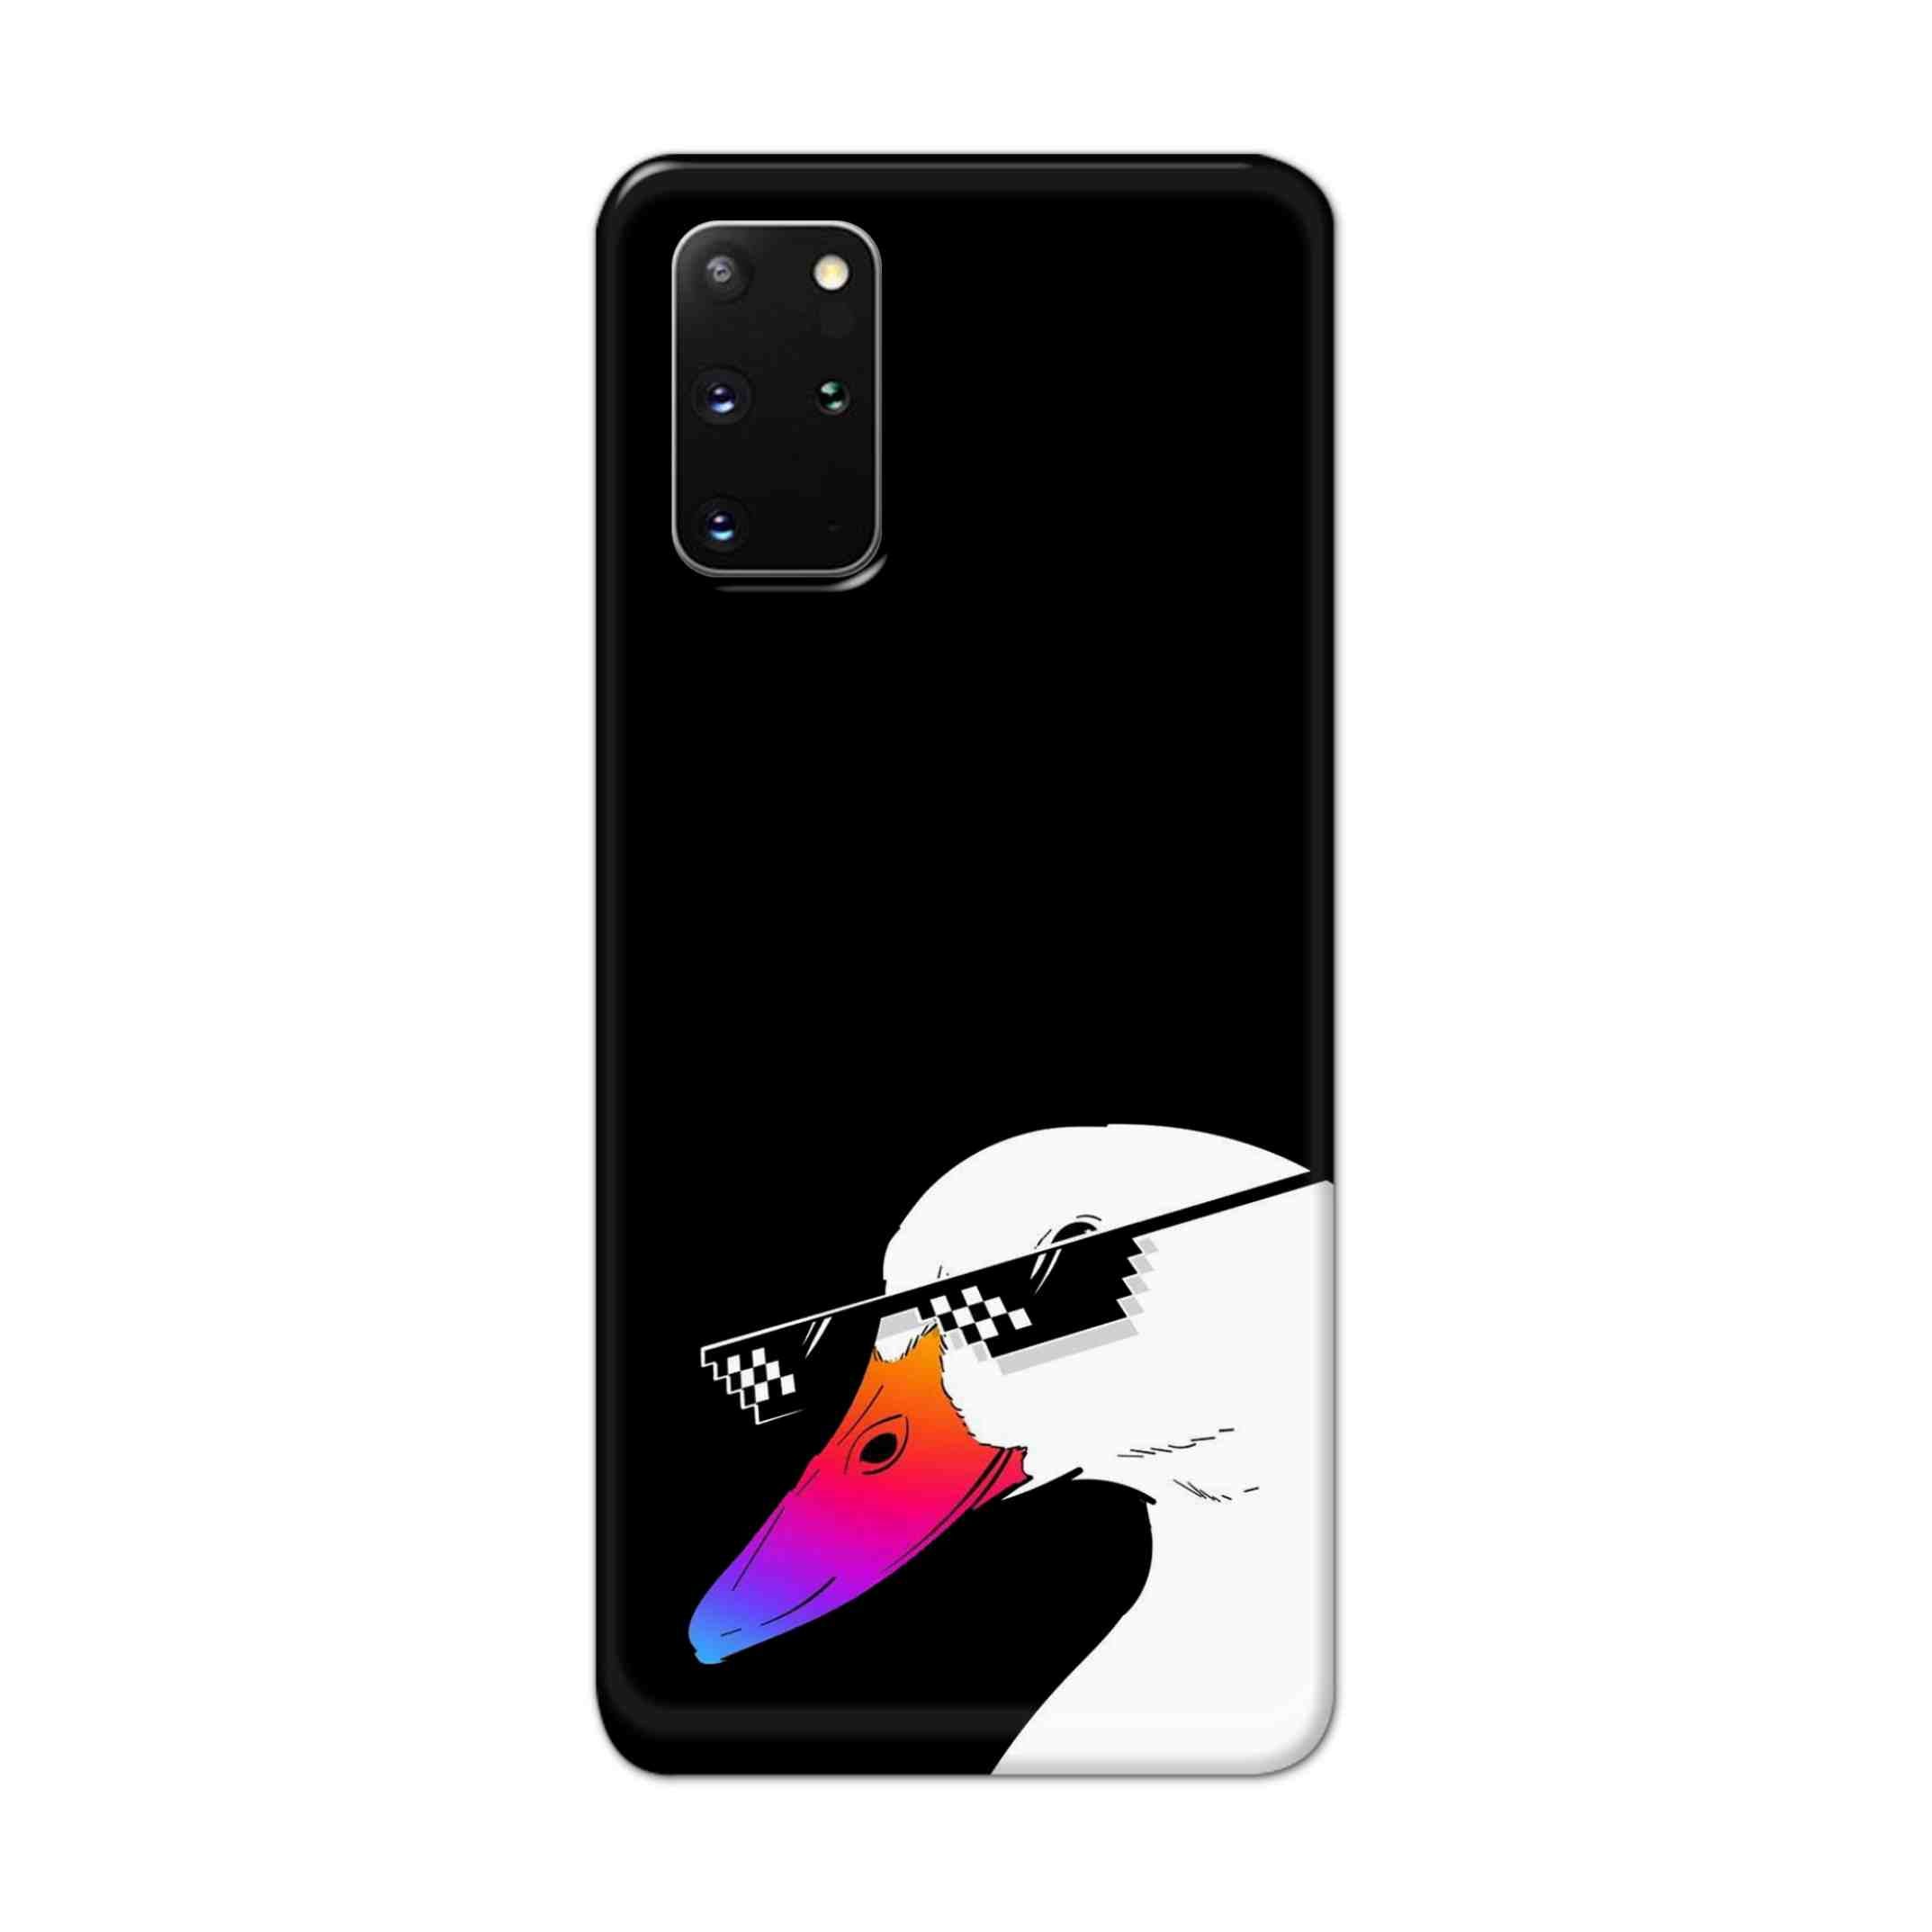 Buy Neon Duck Hard Back Mobile Phone Case Cover For Samsung Galaxy S20 Plus Online